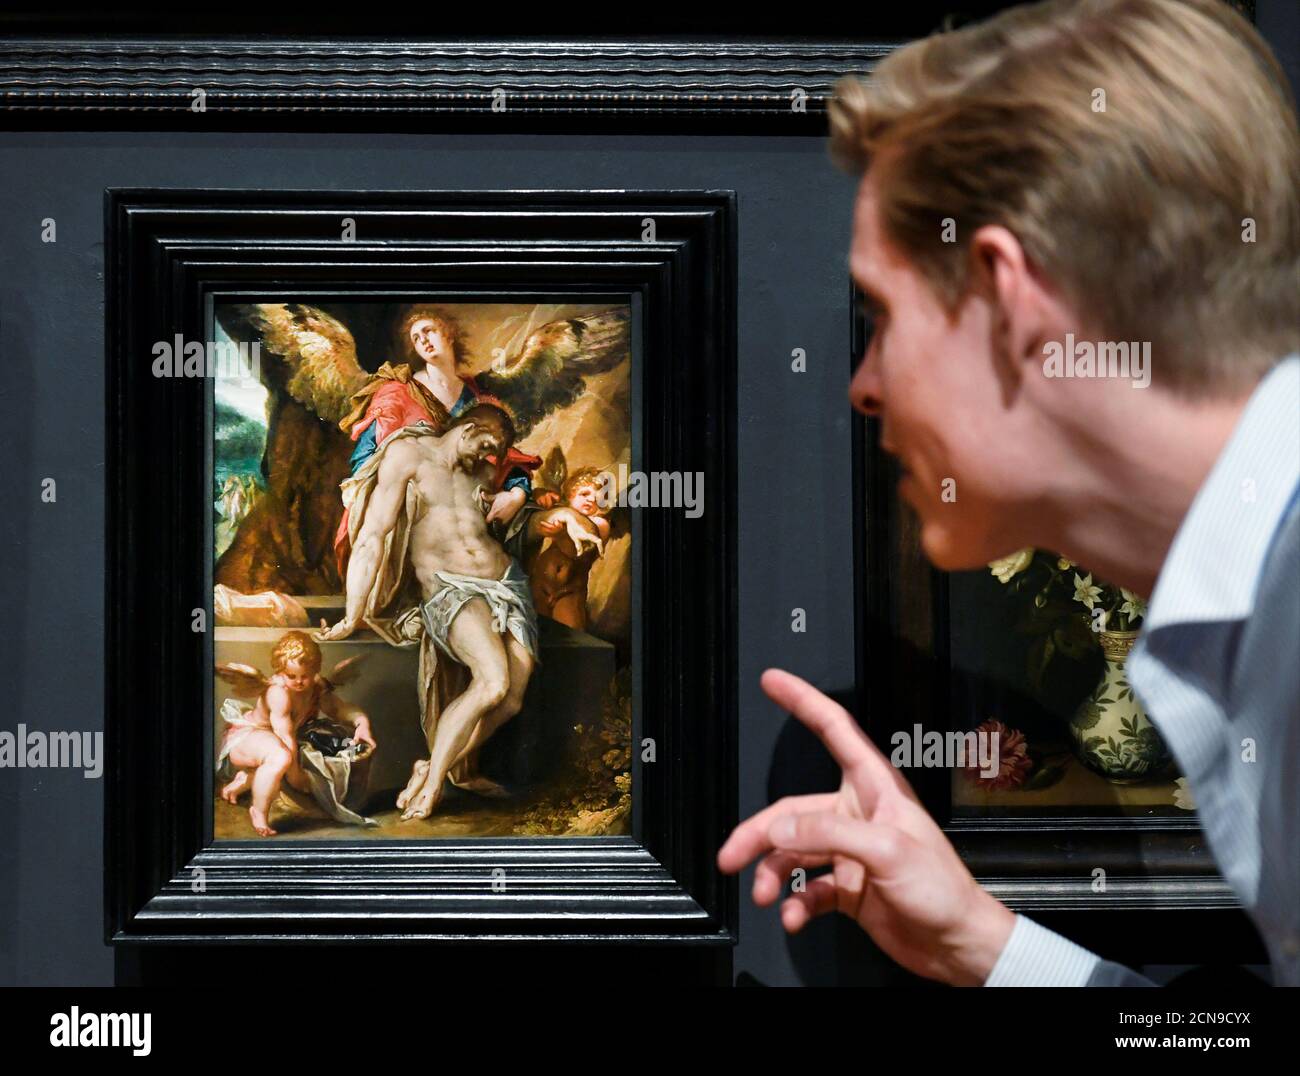 A man looks at the masterpiece 'The Body of Christ Supported by Angels' by the Flemish painter Bartholomeus Spranger at Rijksmuseum, which reopened after the ease of the lockdown measures during the coronavirus disease (COVID-19) outbreak, in Amsterdam, Netherlands June 1, 2020. REUTERS/Piroschka van de Wouw Stock Photo